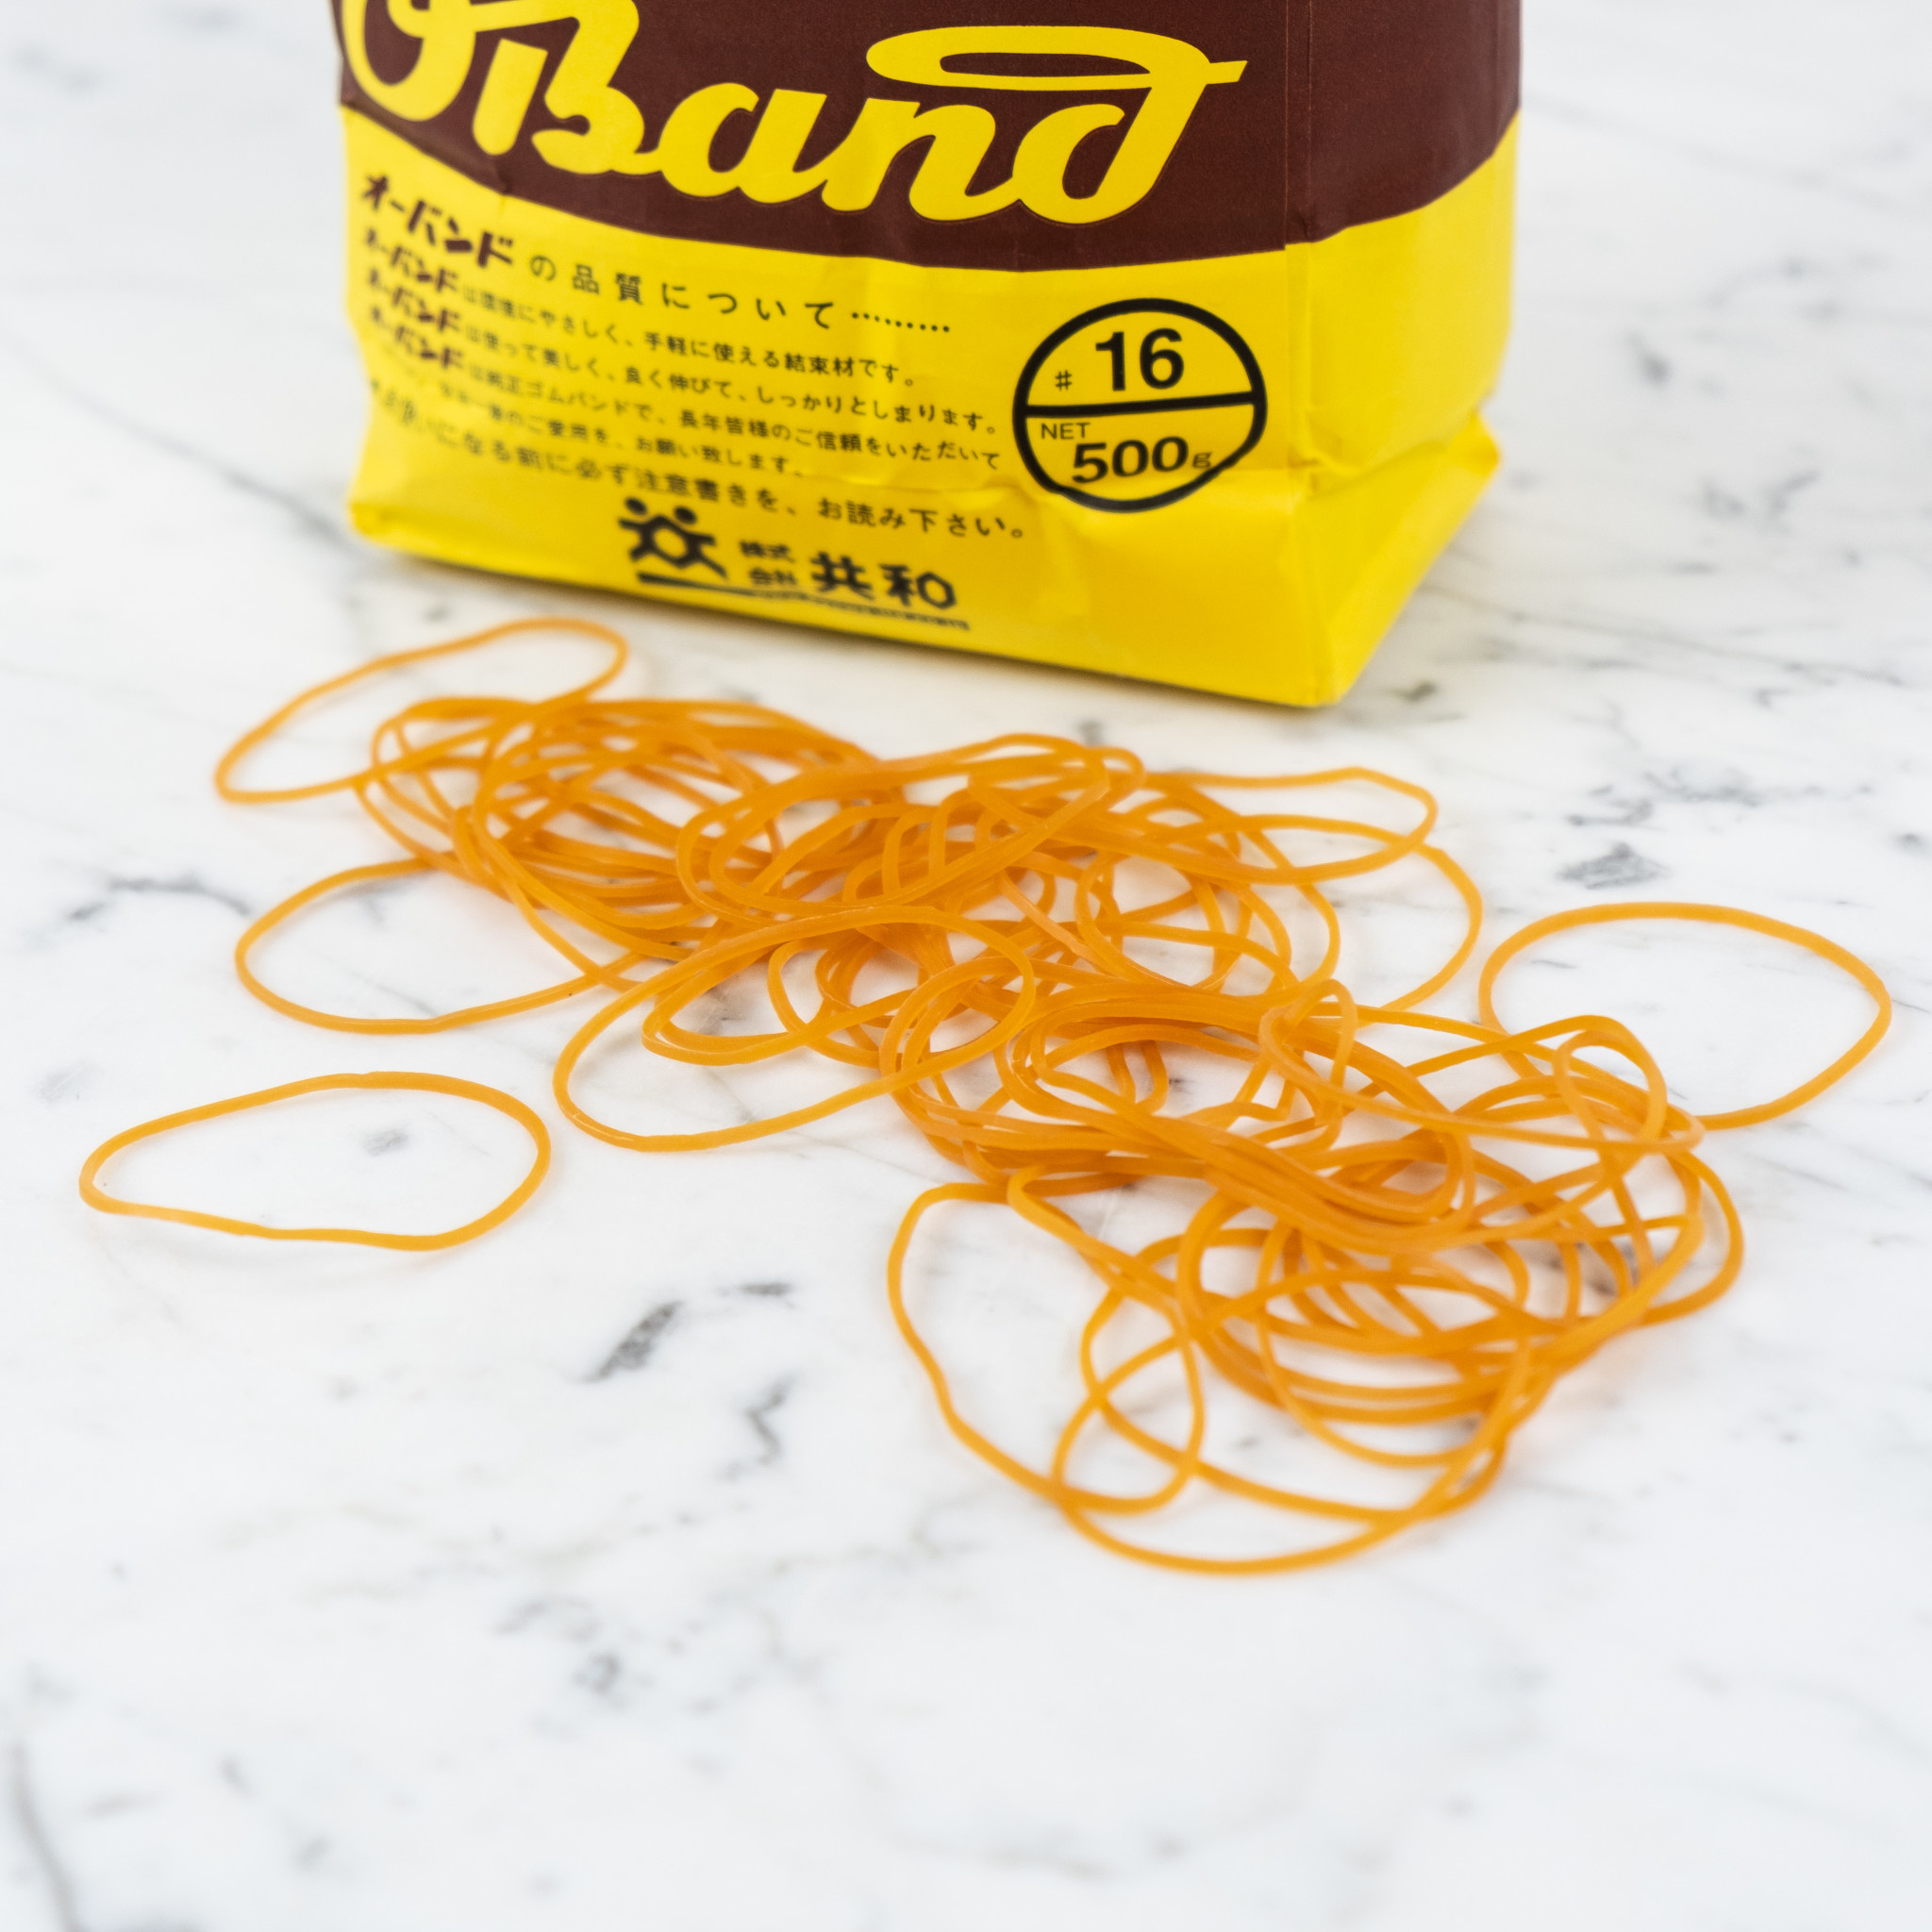 O'Band Rubber Bands - Large 500 gram Bag - The Foundry Home Goods